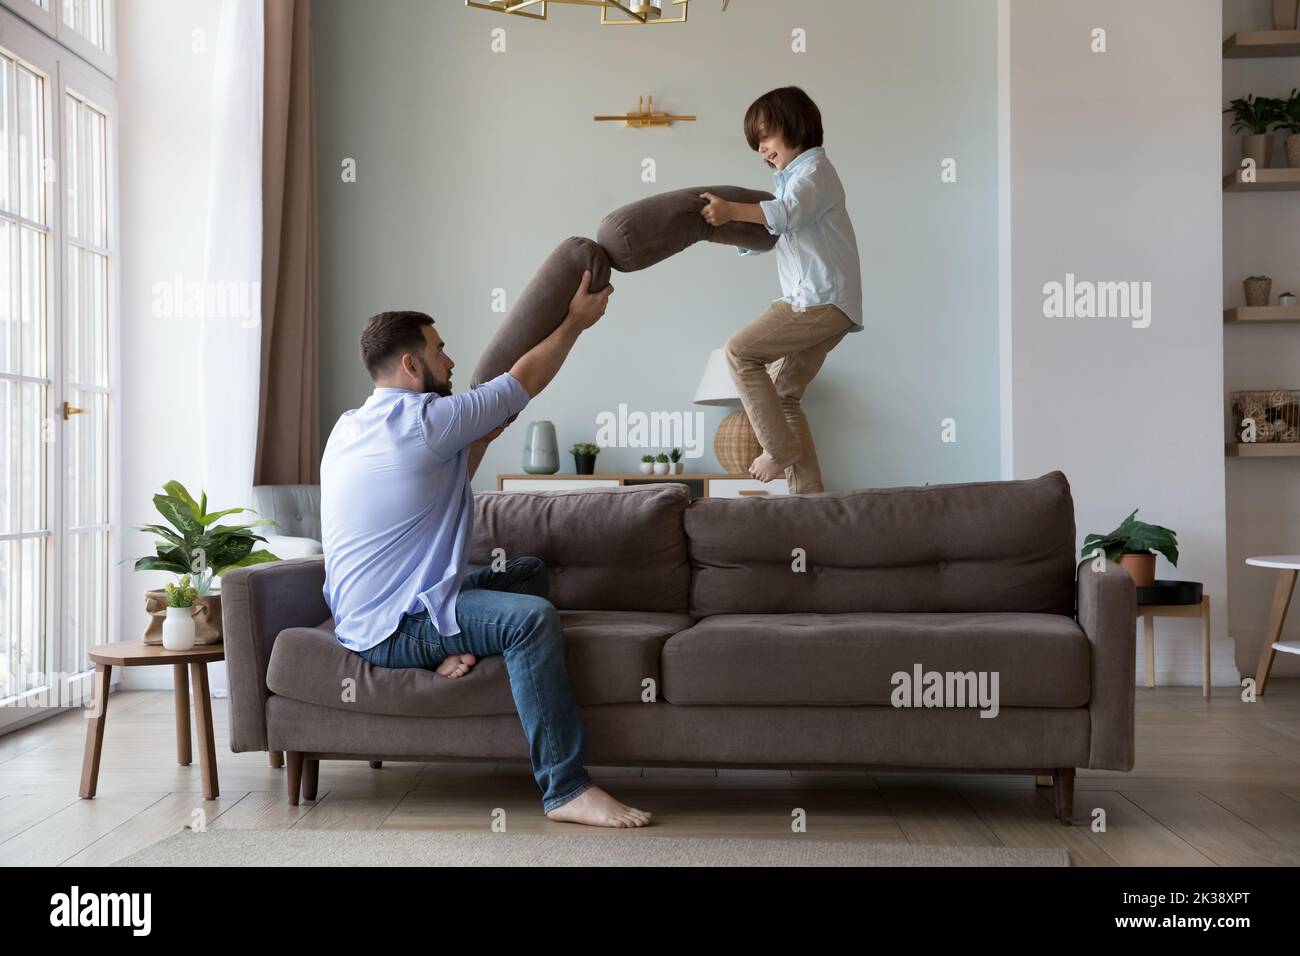 Excited son kid and dad fighting with pillows on sofa Stock Photo